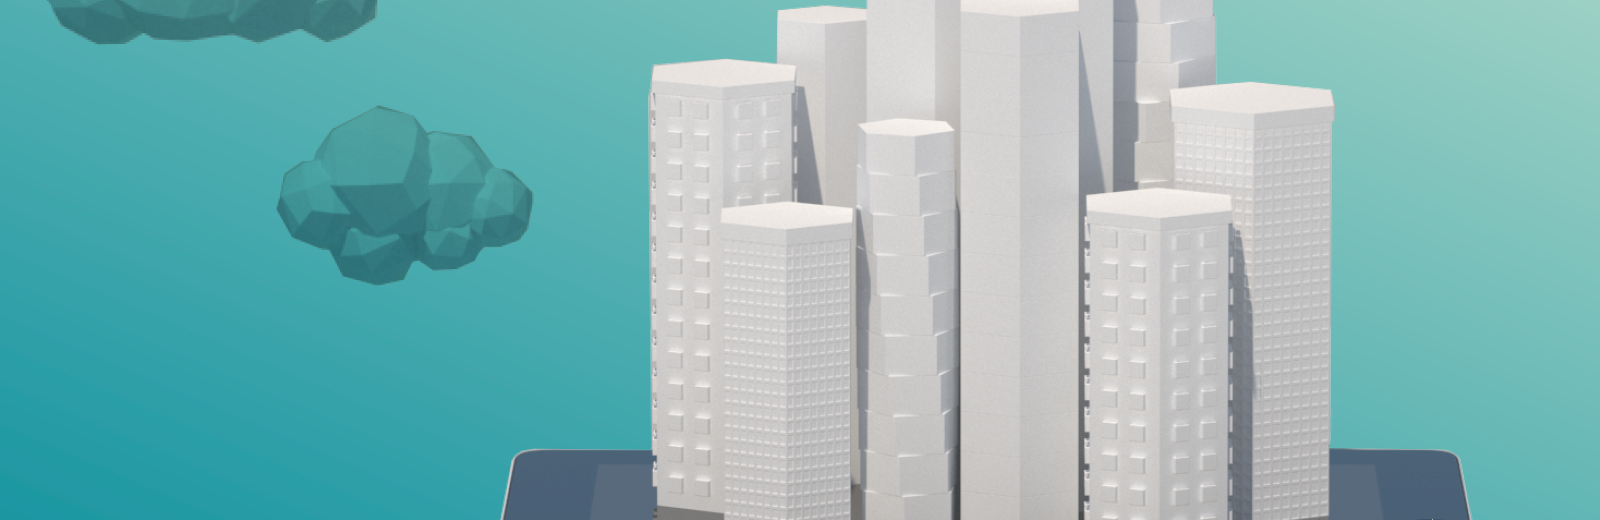 Animation of buildings 